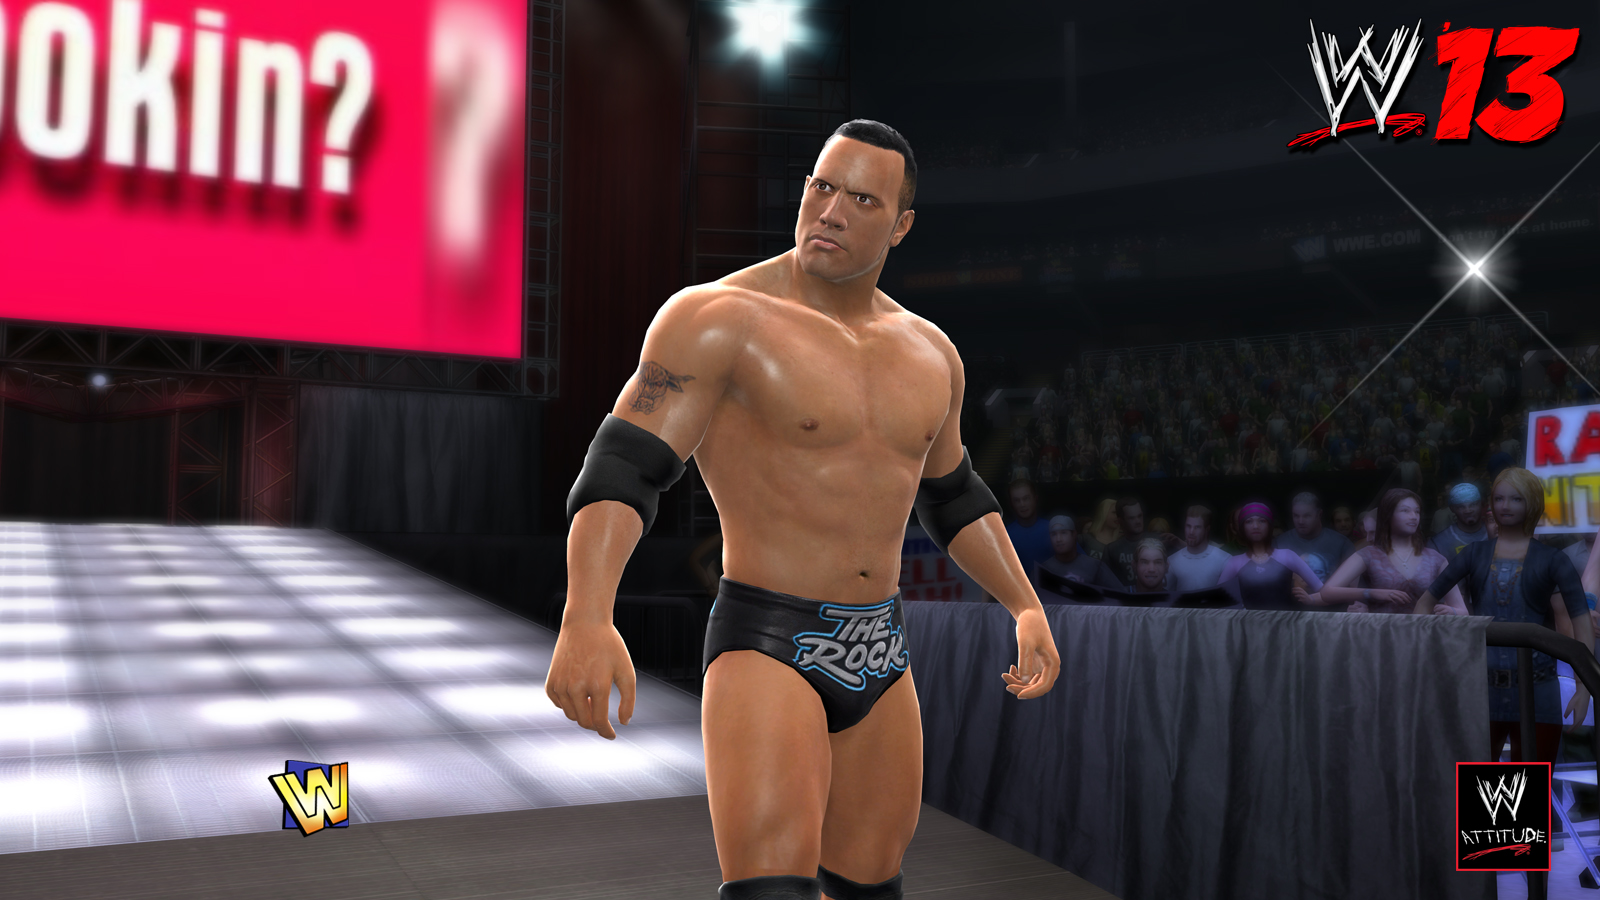 WWE 13 UK Pre-order Bonuses Announced and FINALLY.. The Rock Has Come Back!